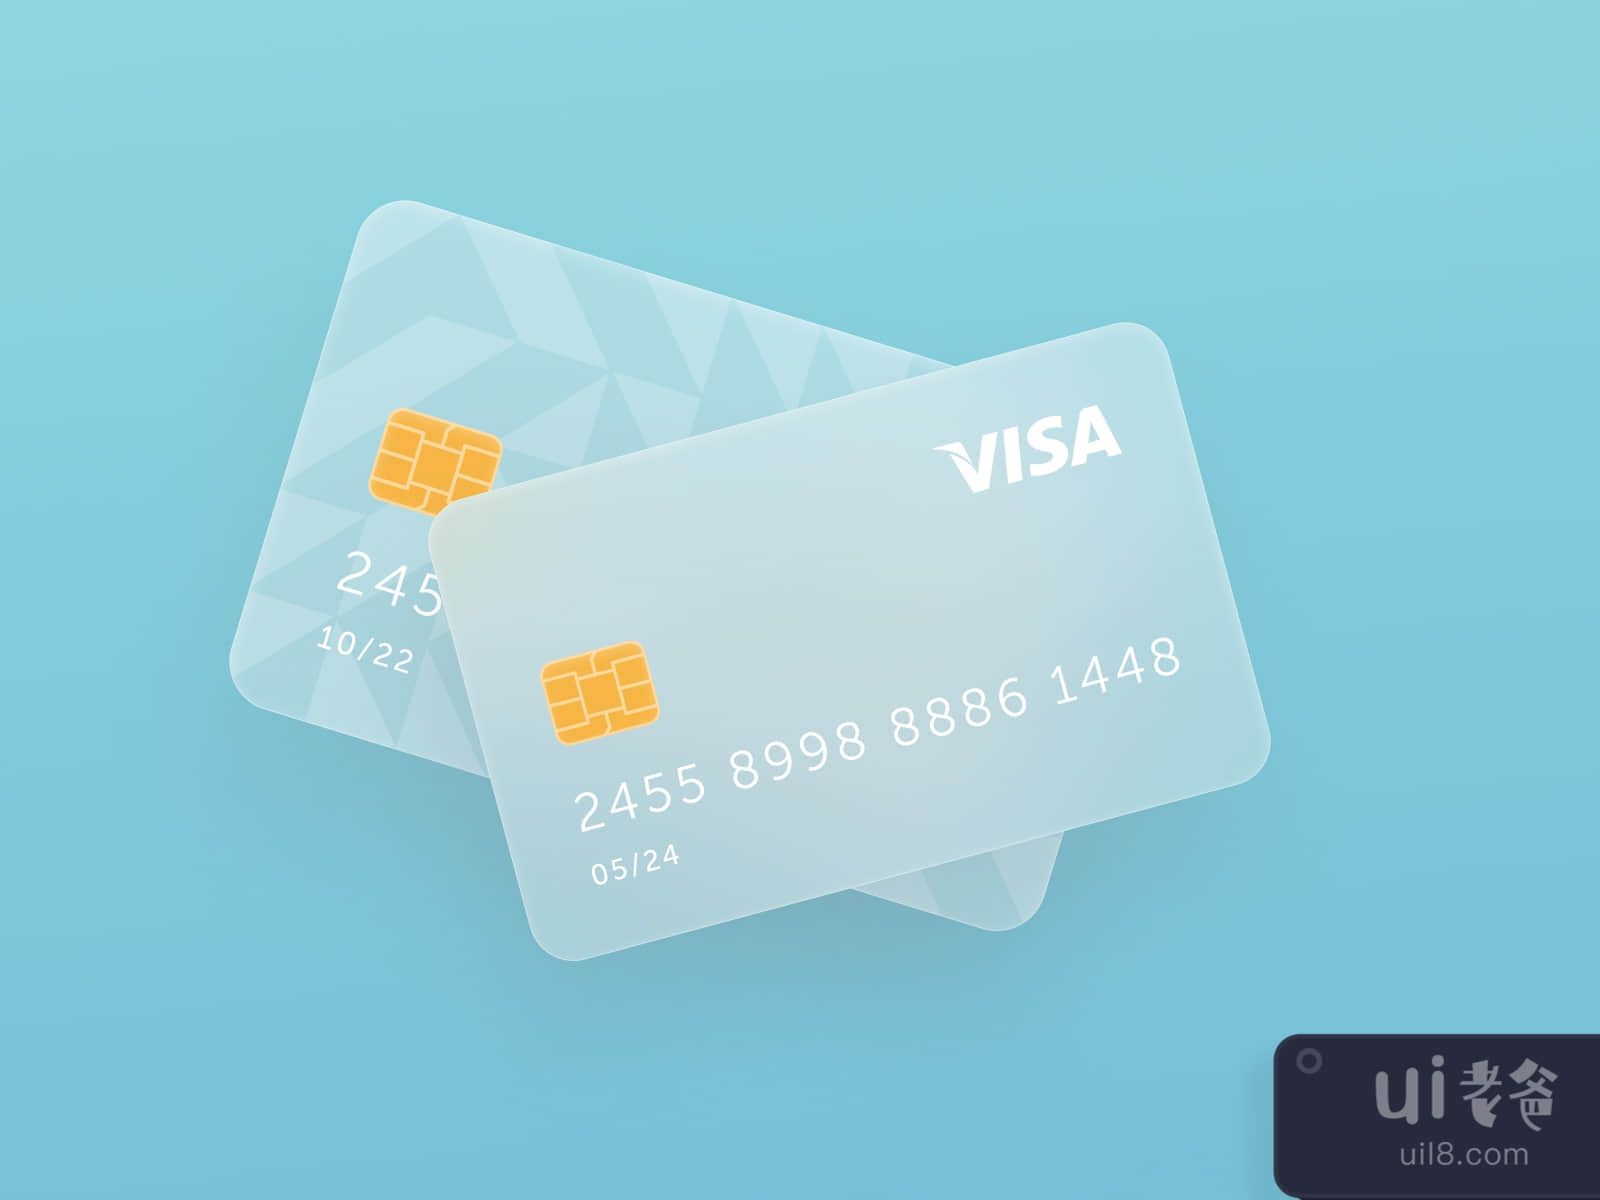 Neumorphic Bank Card for Figma and Adobe XD No 4